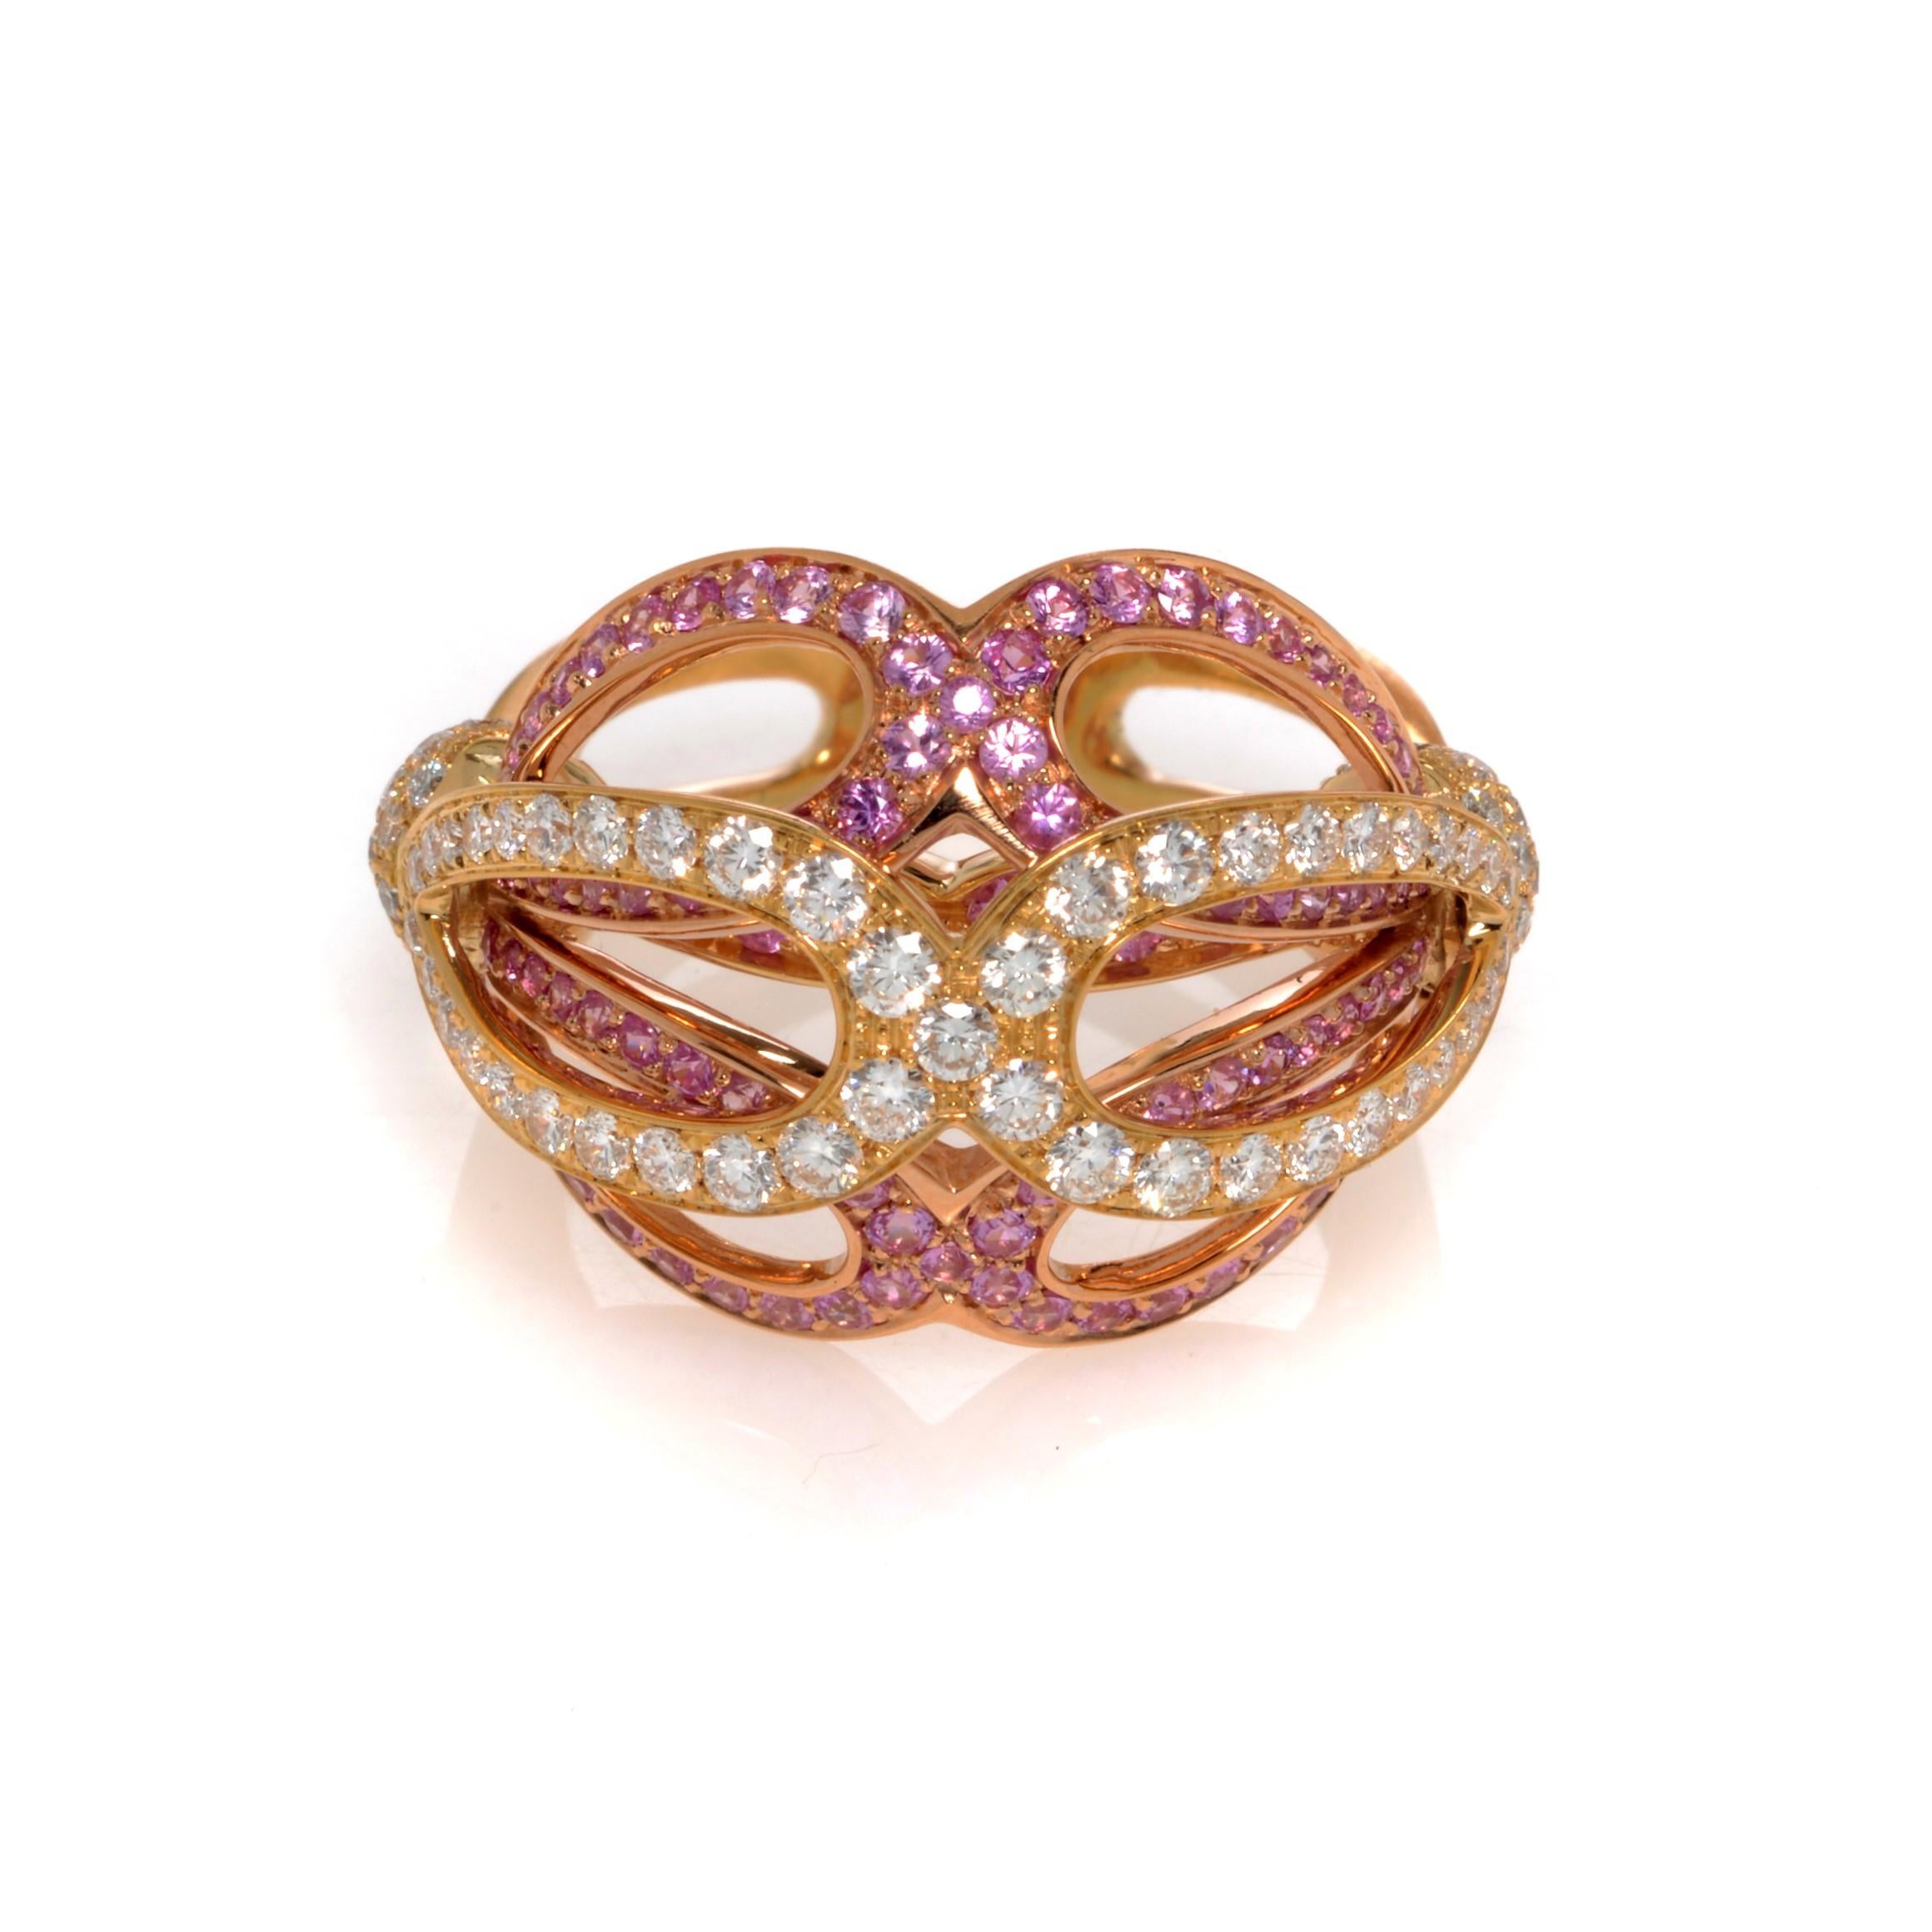 Beautiful Diamond and Pink Sapphire Cluster Cocktail Ring crafted in 18k Yellow Gold. This ring is pave set with 1.06cttw of brilliant cut diamonds. Diamond color G and VVS clarity. Also set with round cut natural pink Sapphires, totaling 1.26cttw.